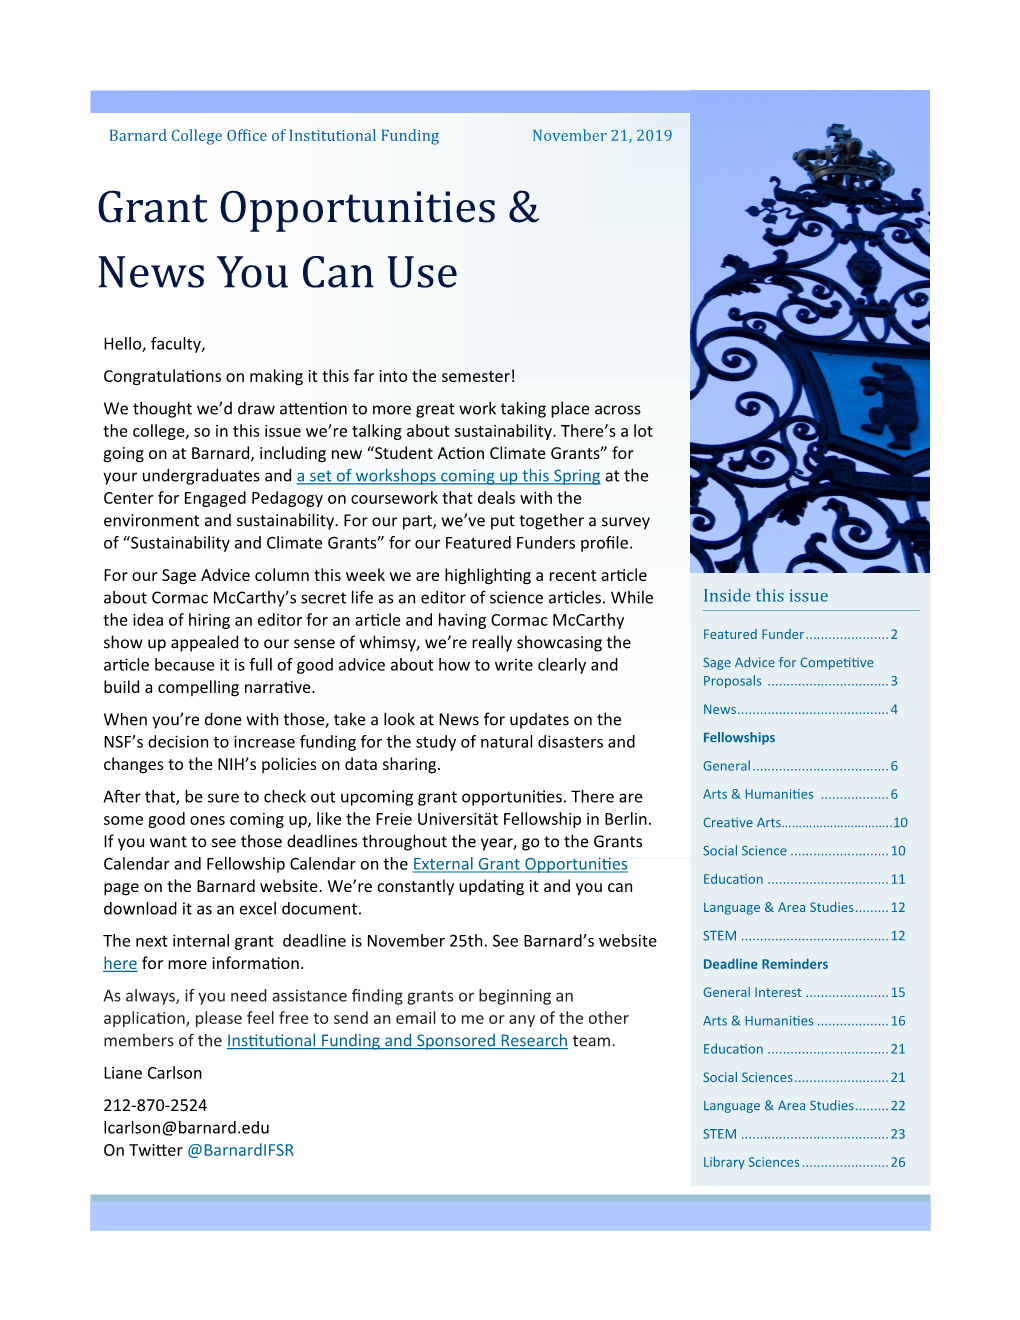 Grant Opportunities & News You Can